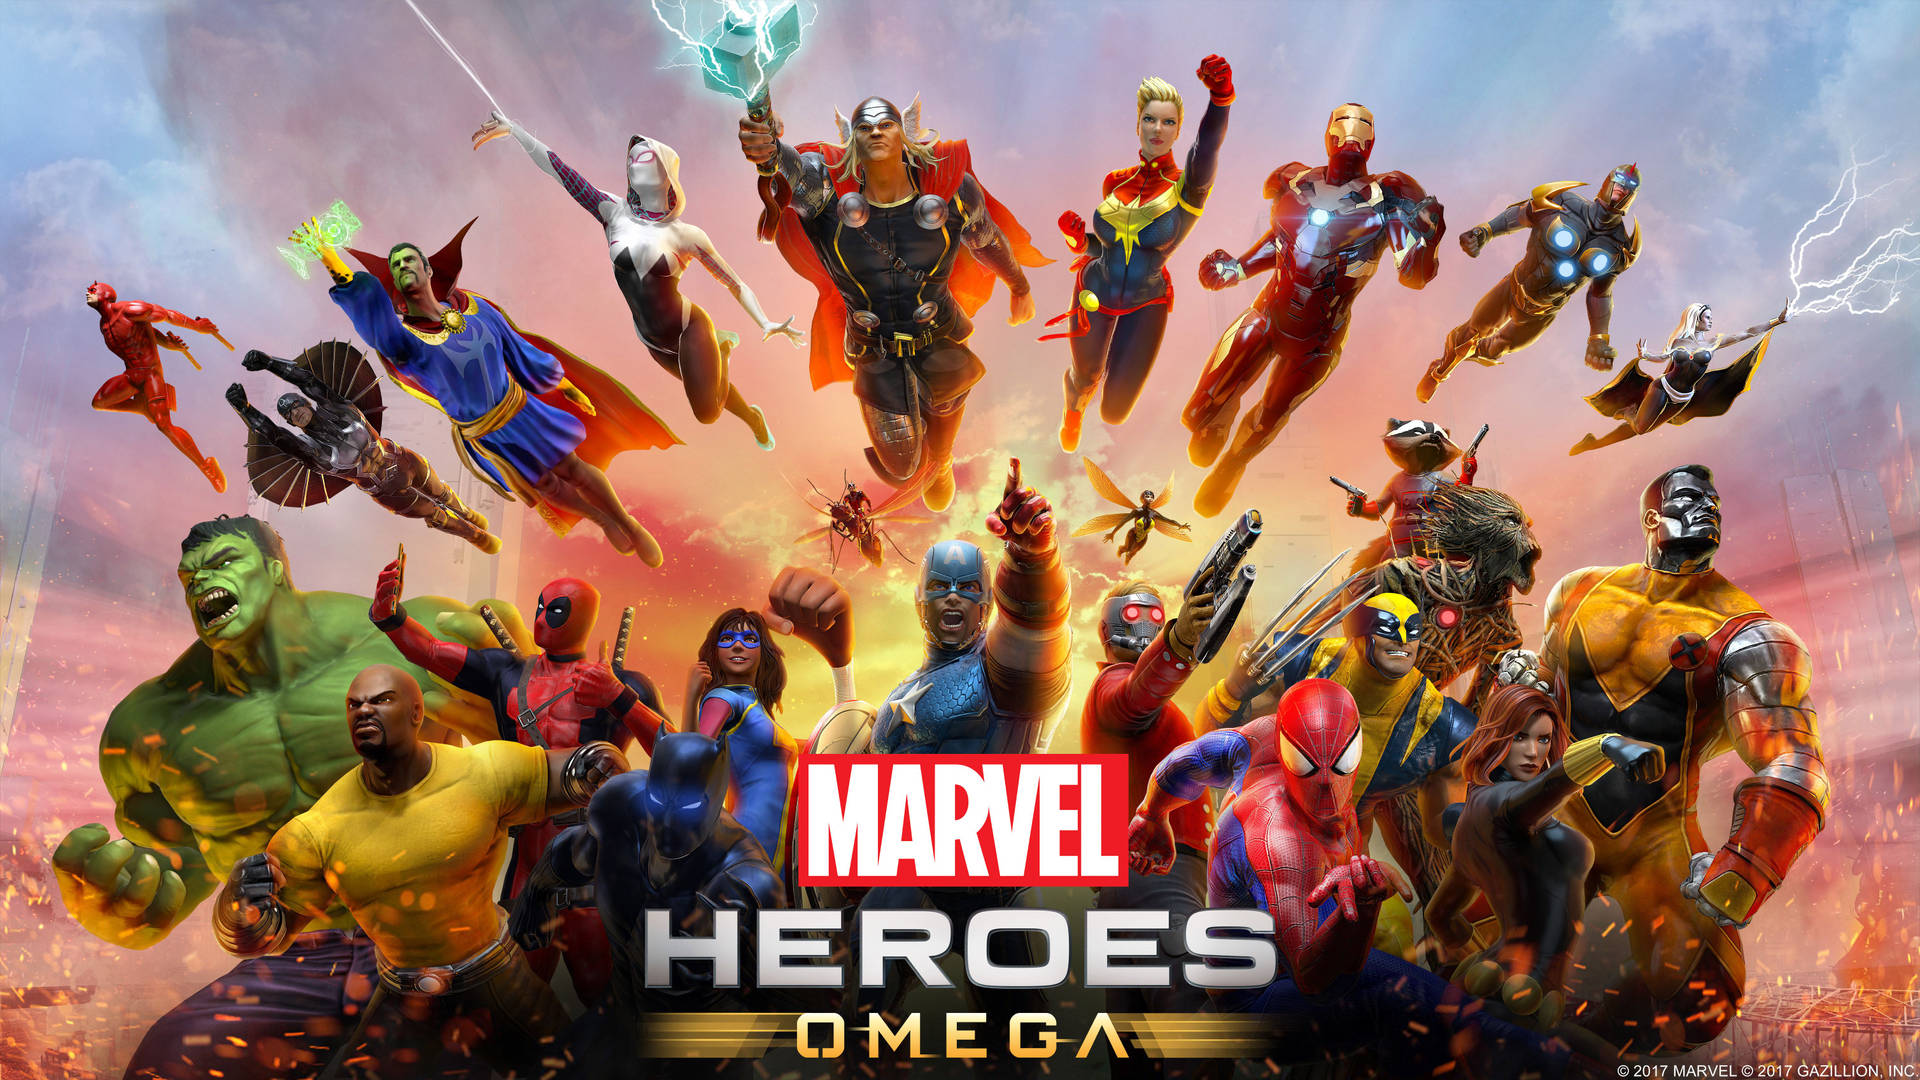 An All-Star Roster of Marvel Heroes Wallpaper